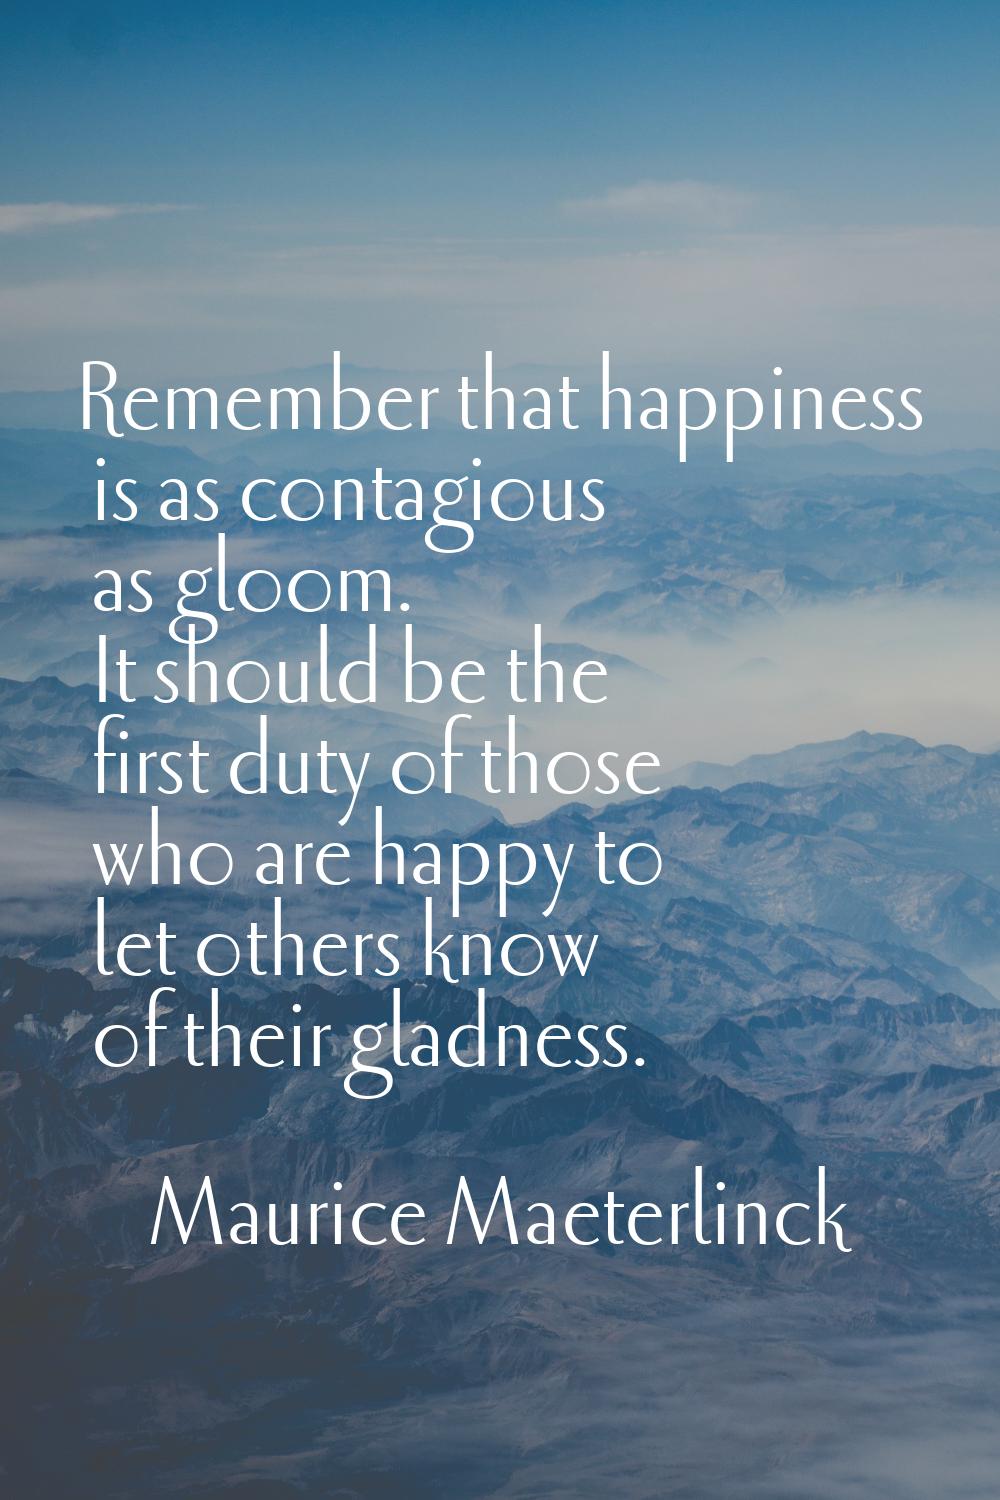 Remember that happiness is as contagious as gloom. It should be the first duty of those who are hap